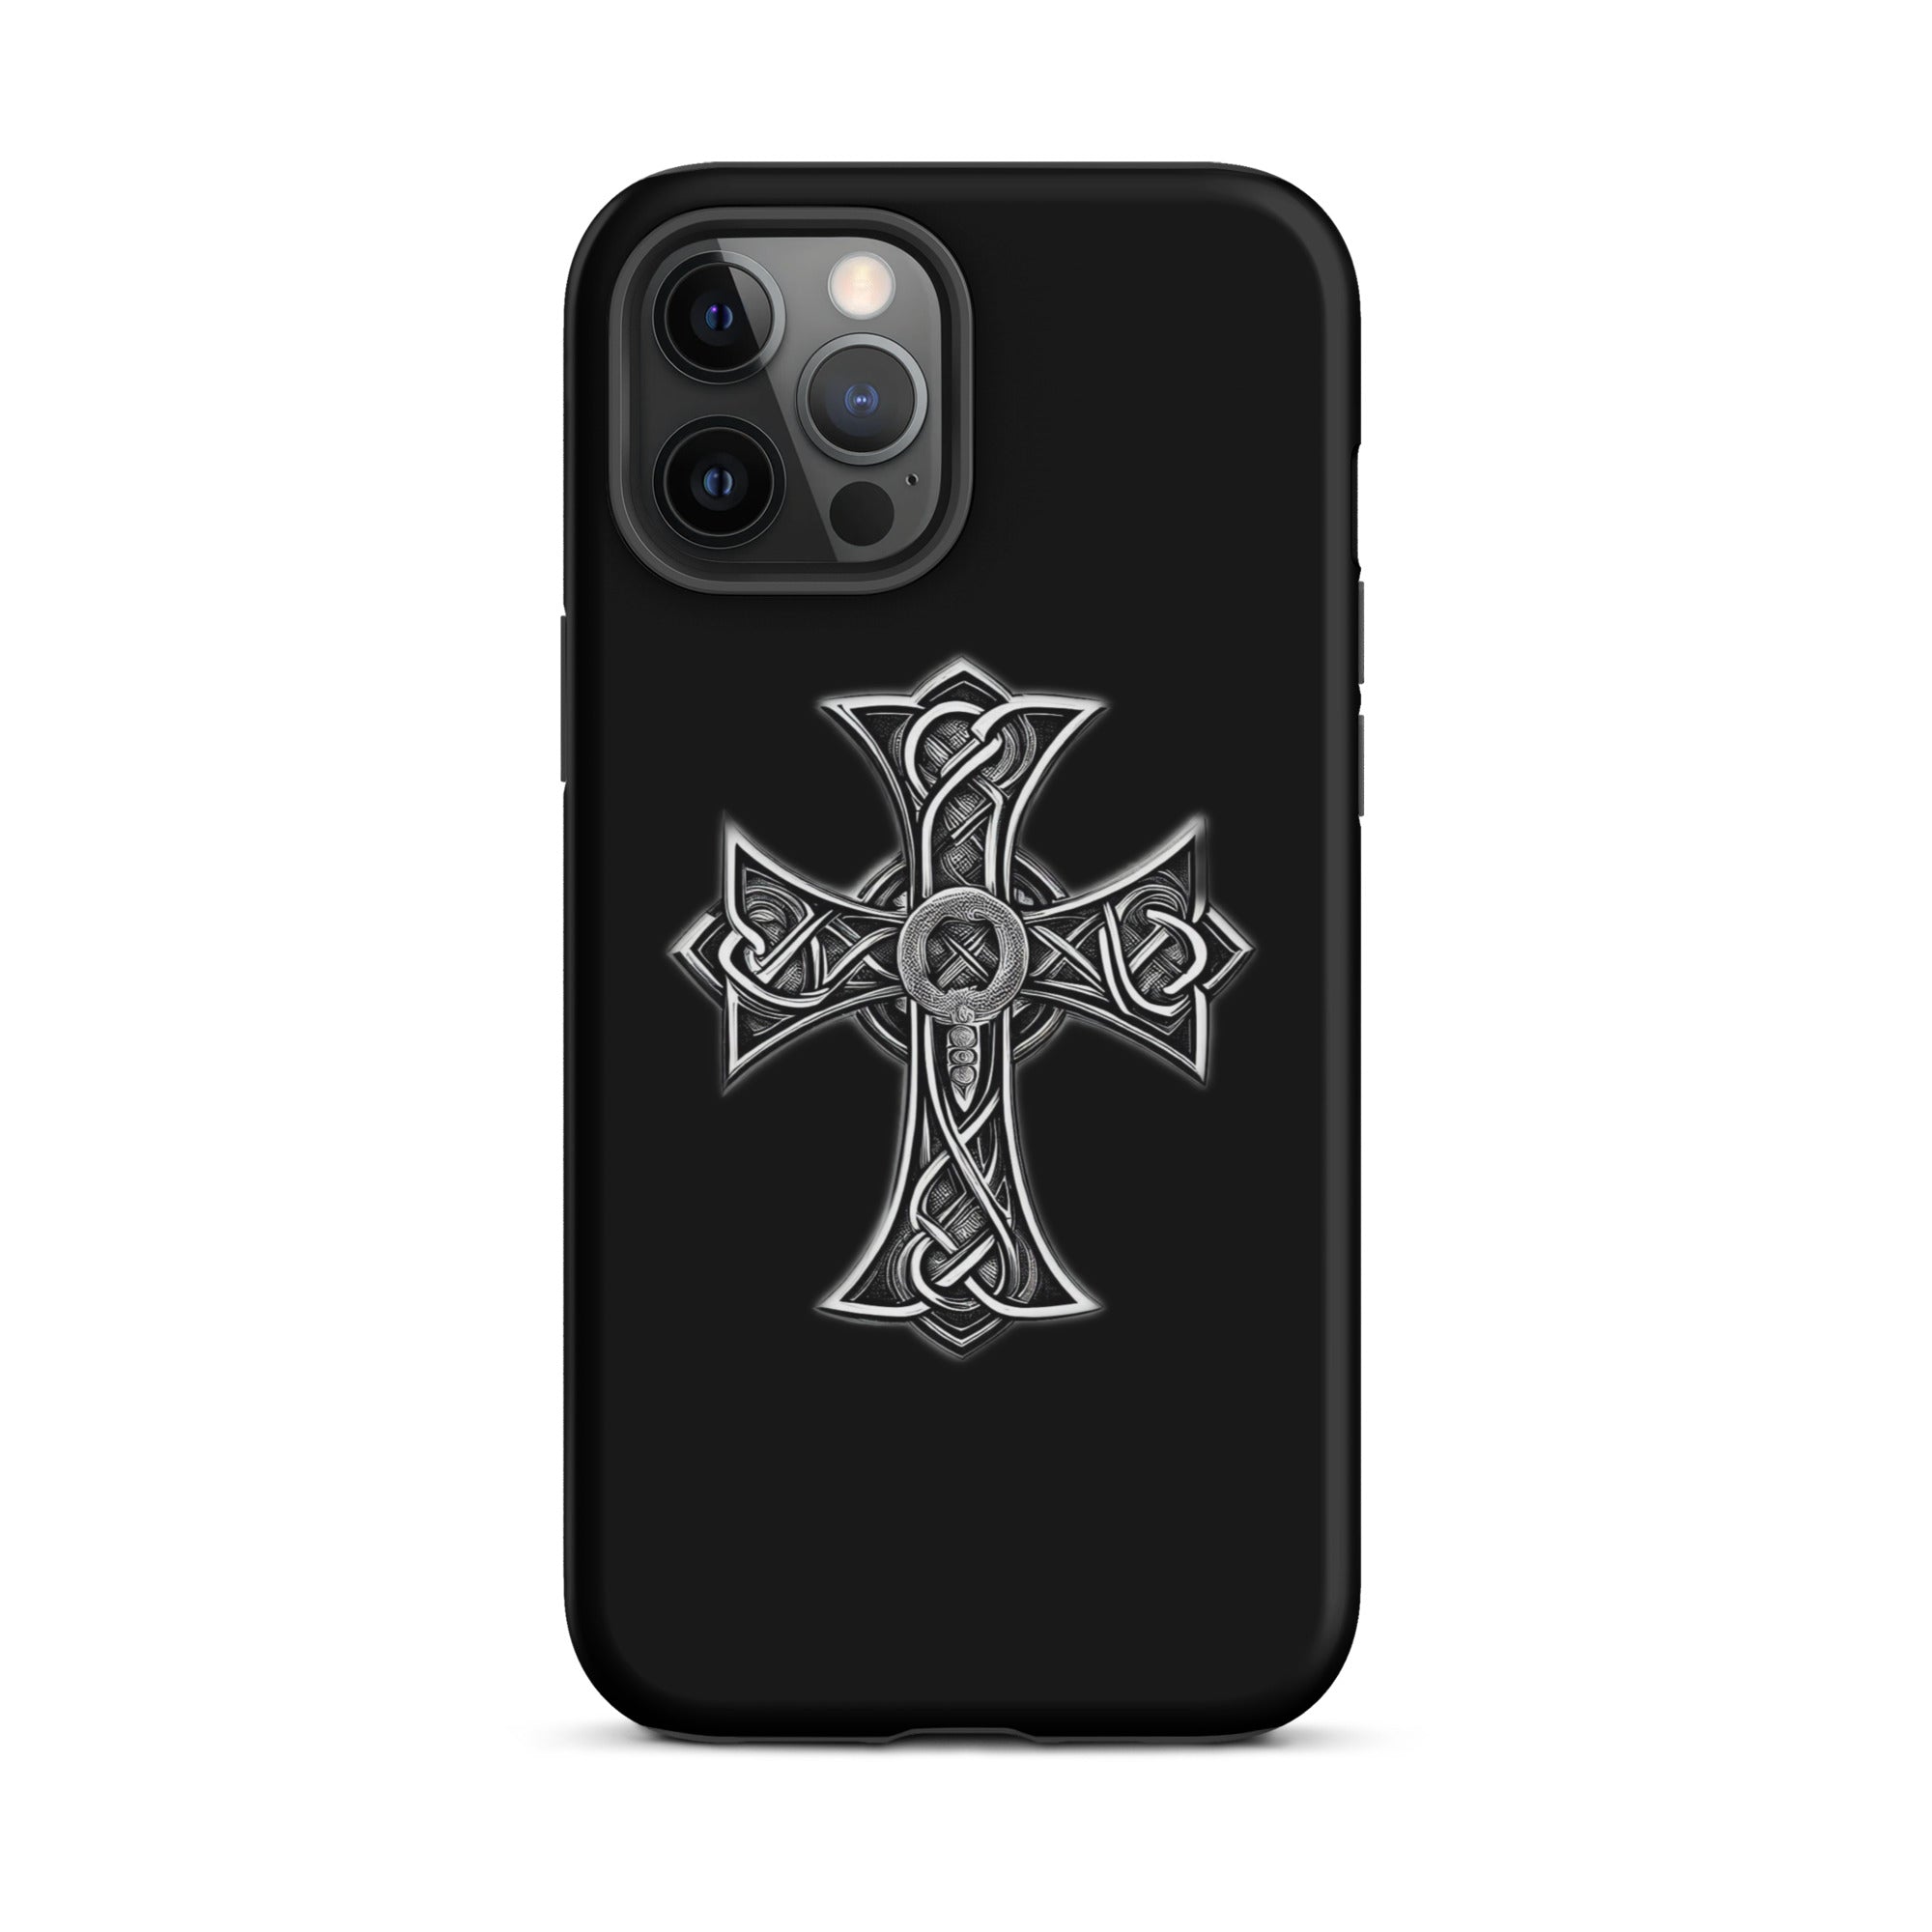 tough-case-for-iphone-matte-iphone-12-pro-max-front-6563851a37794.jpg